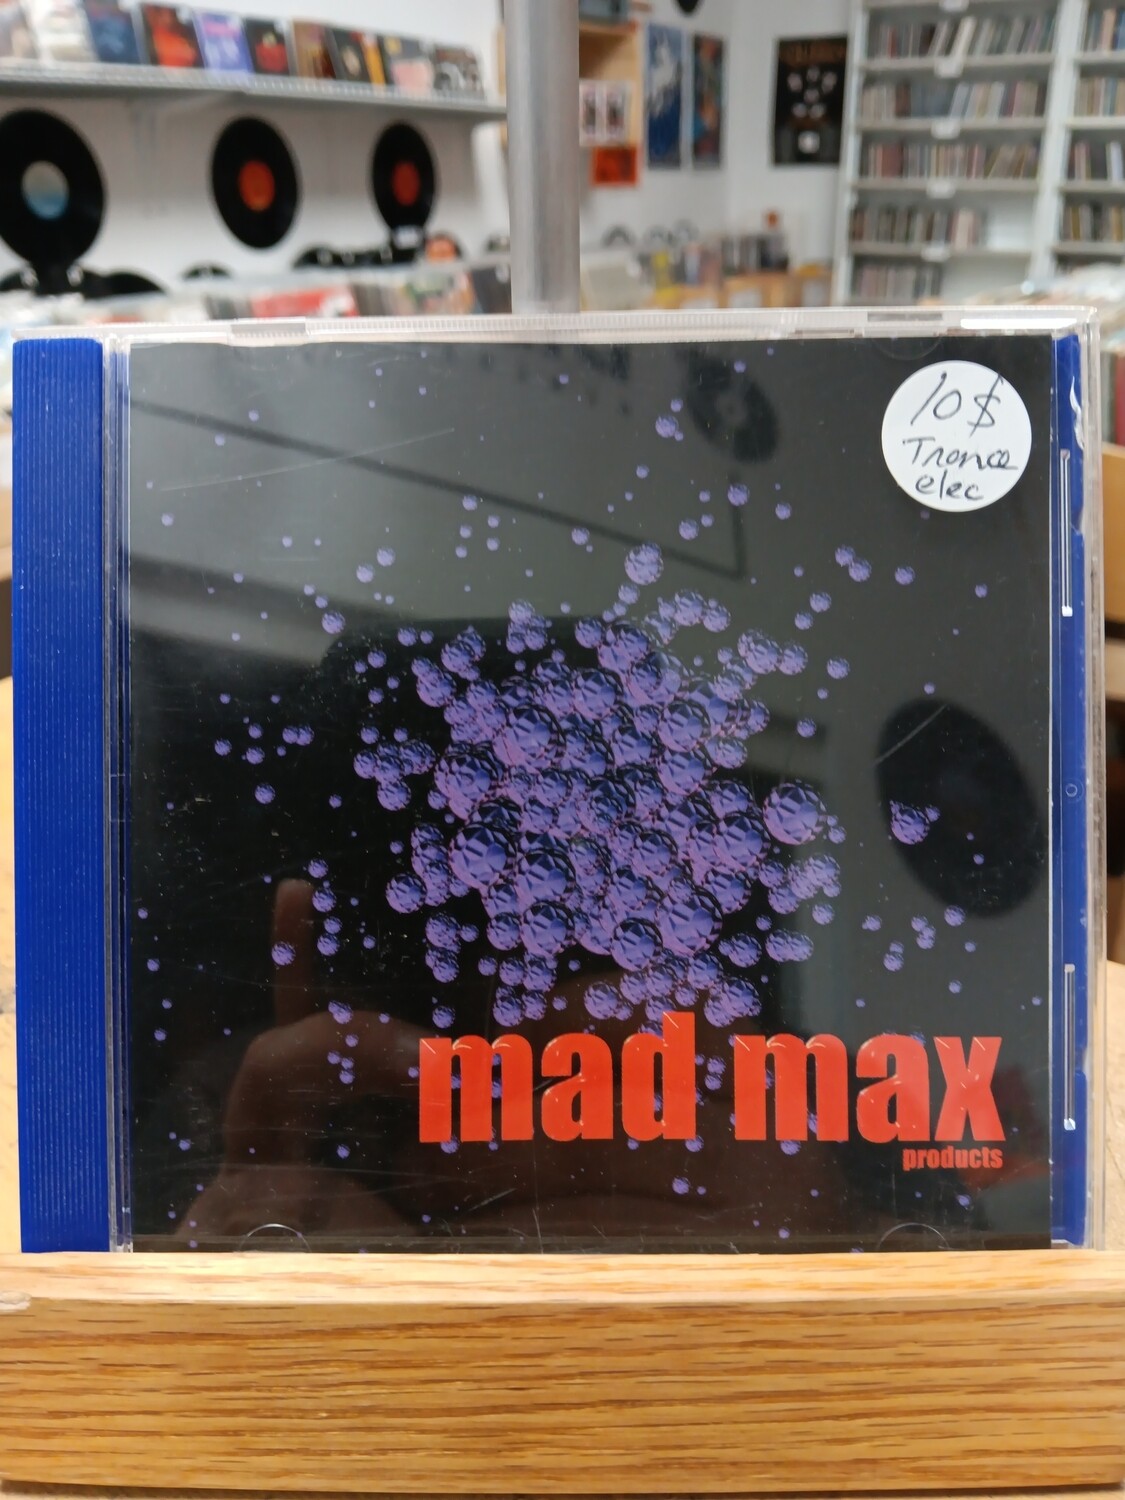 MAD MAX PRODUCTS - Observation (CD)